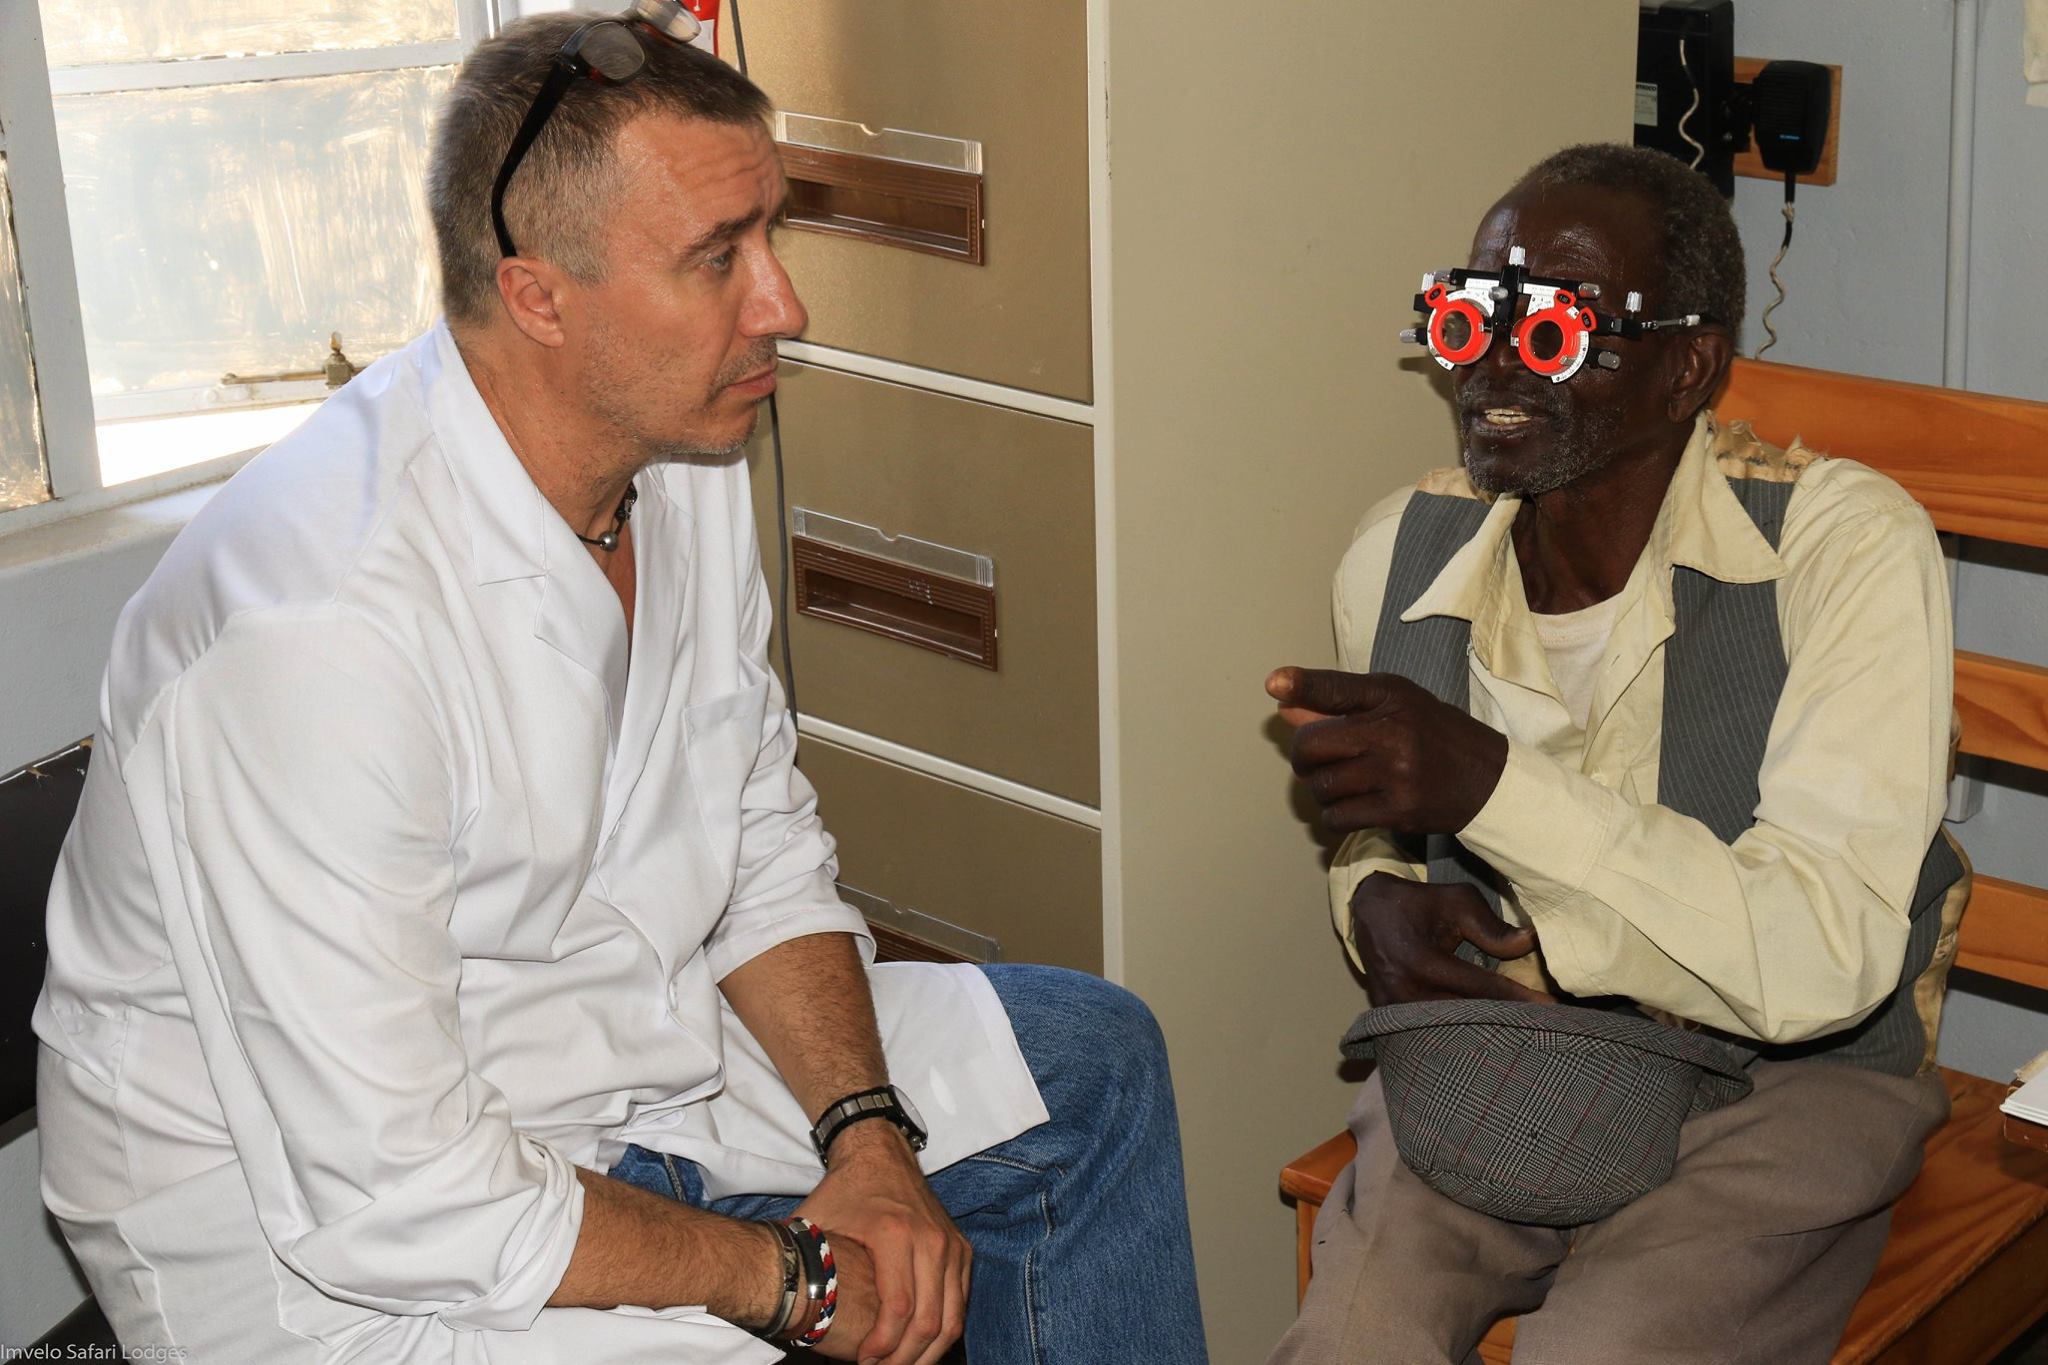  Pablo, an ophthalmologist and newest member of our team, treating a patient. 